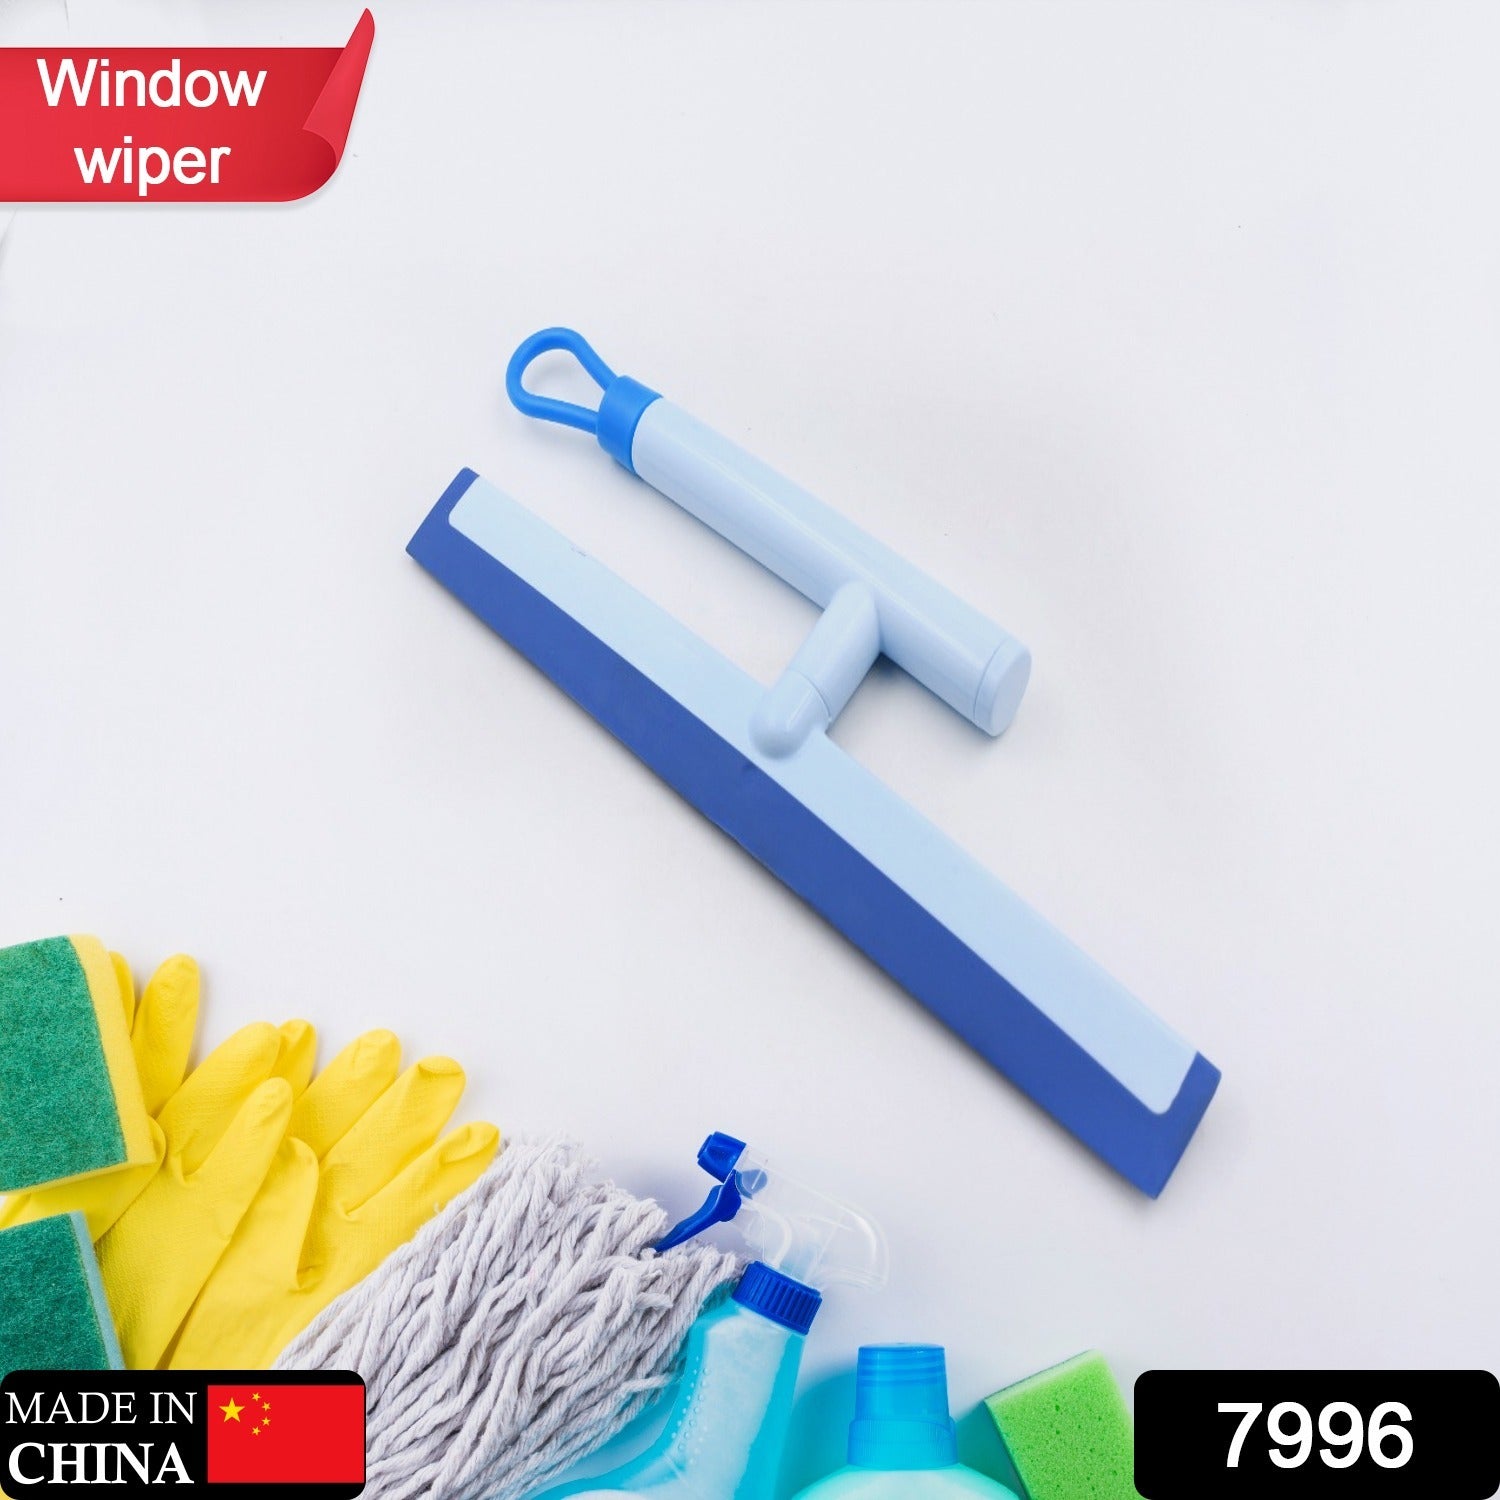 Glass Cleaning Wiper Window Cleaner, for Bathroom, Windows, and Car Glass, Window  Mirror Scraper Brush with Soft Rubber